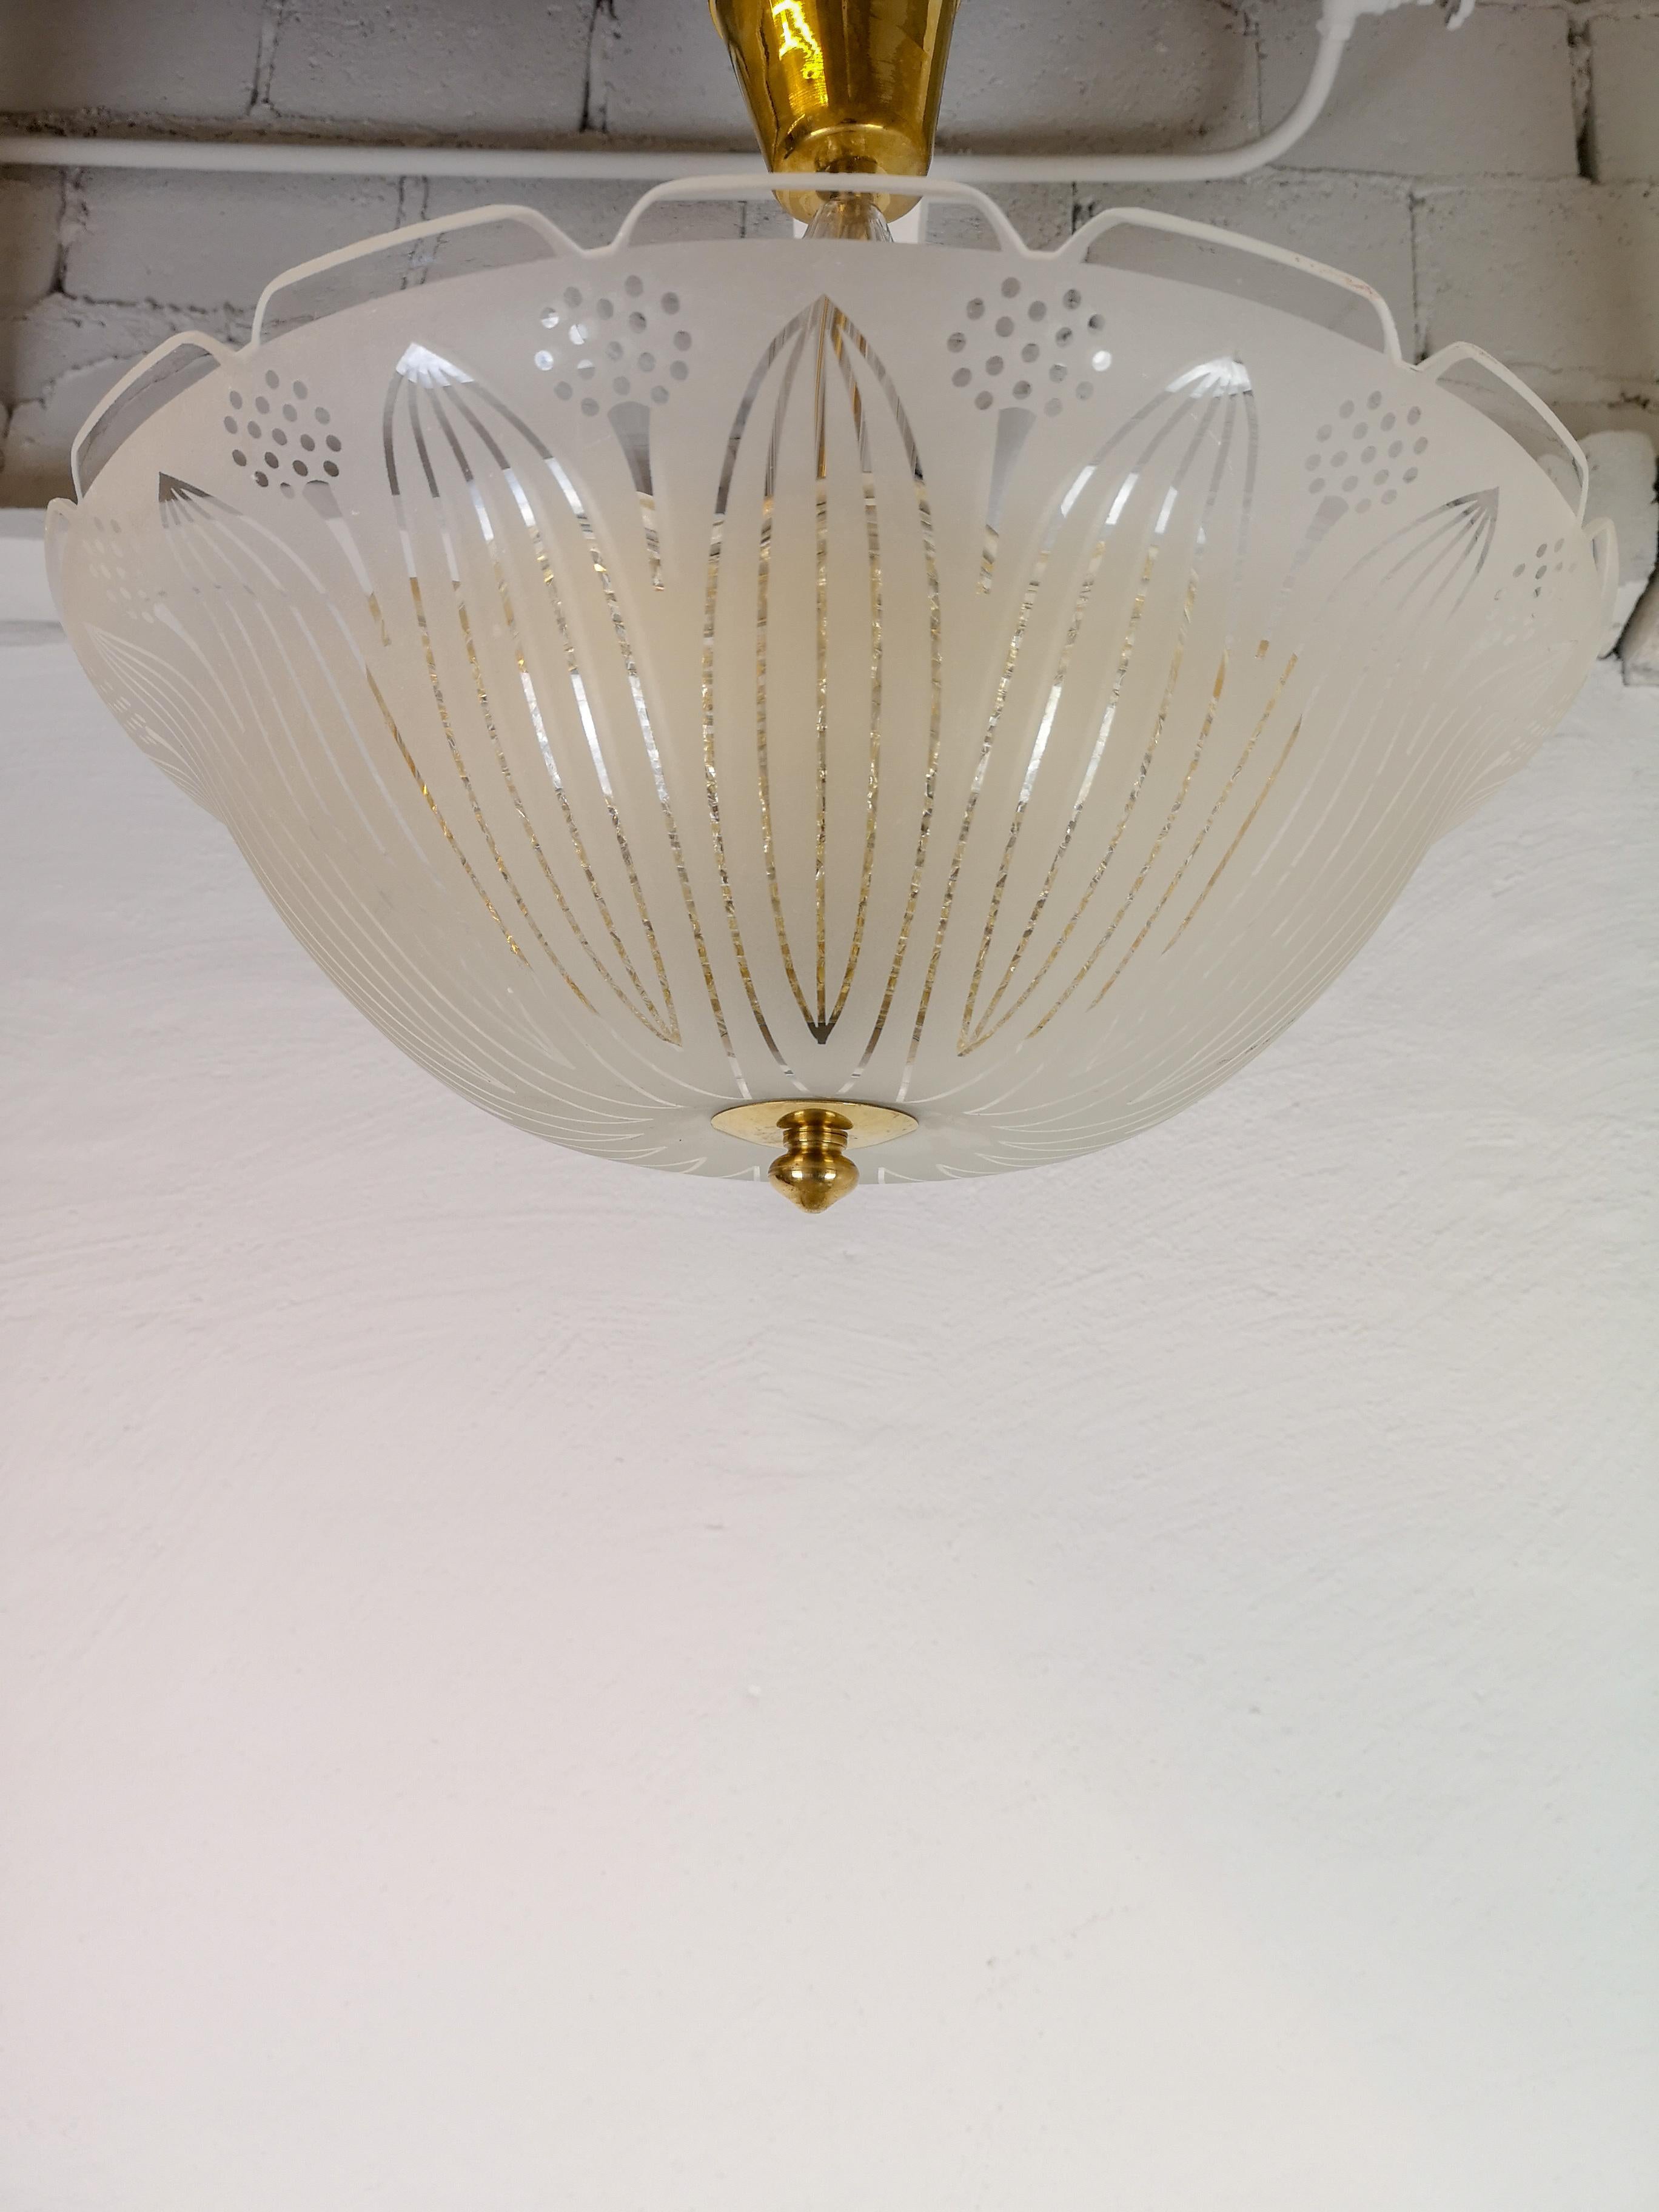 Large Swedish Orrefors Textured Glass Ceiling Fixture For Sale 2